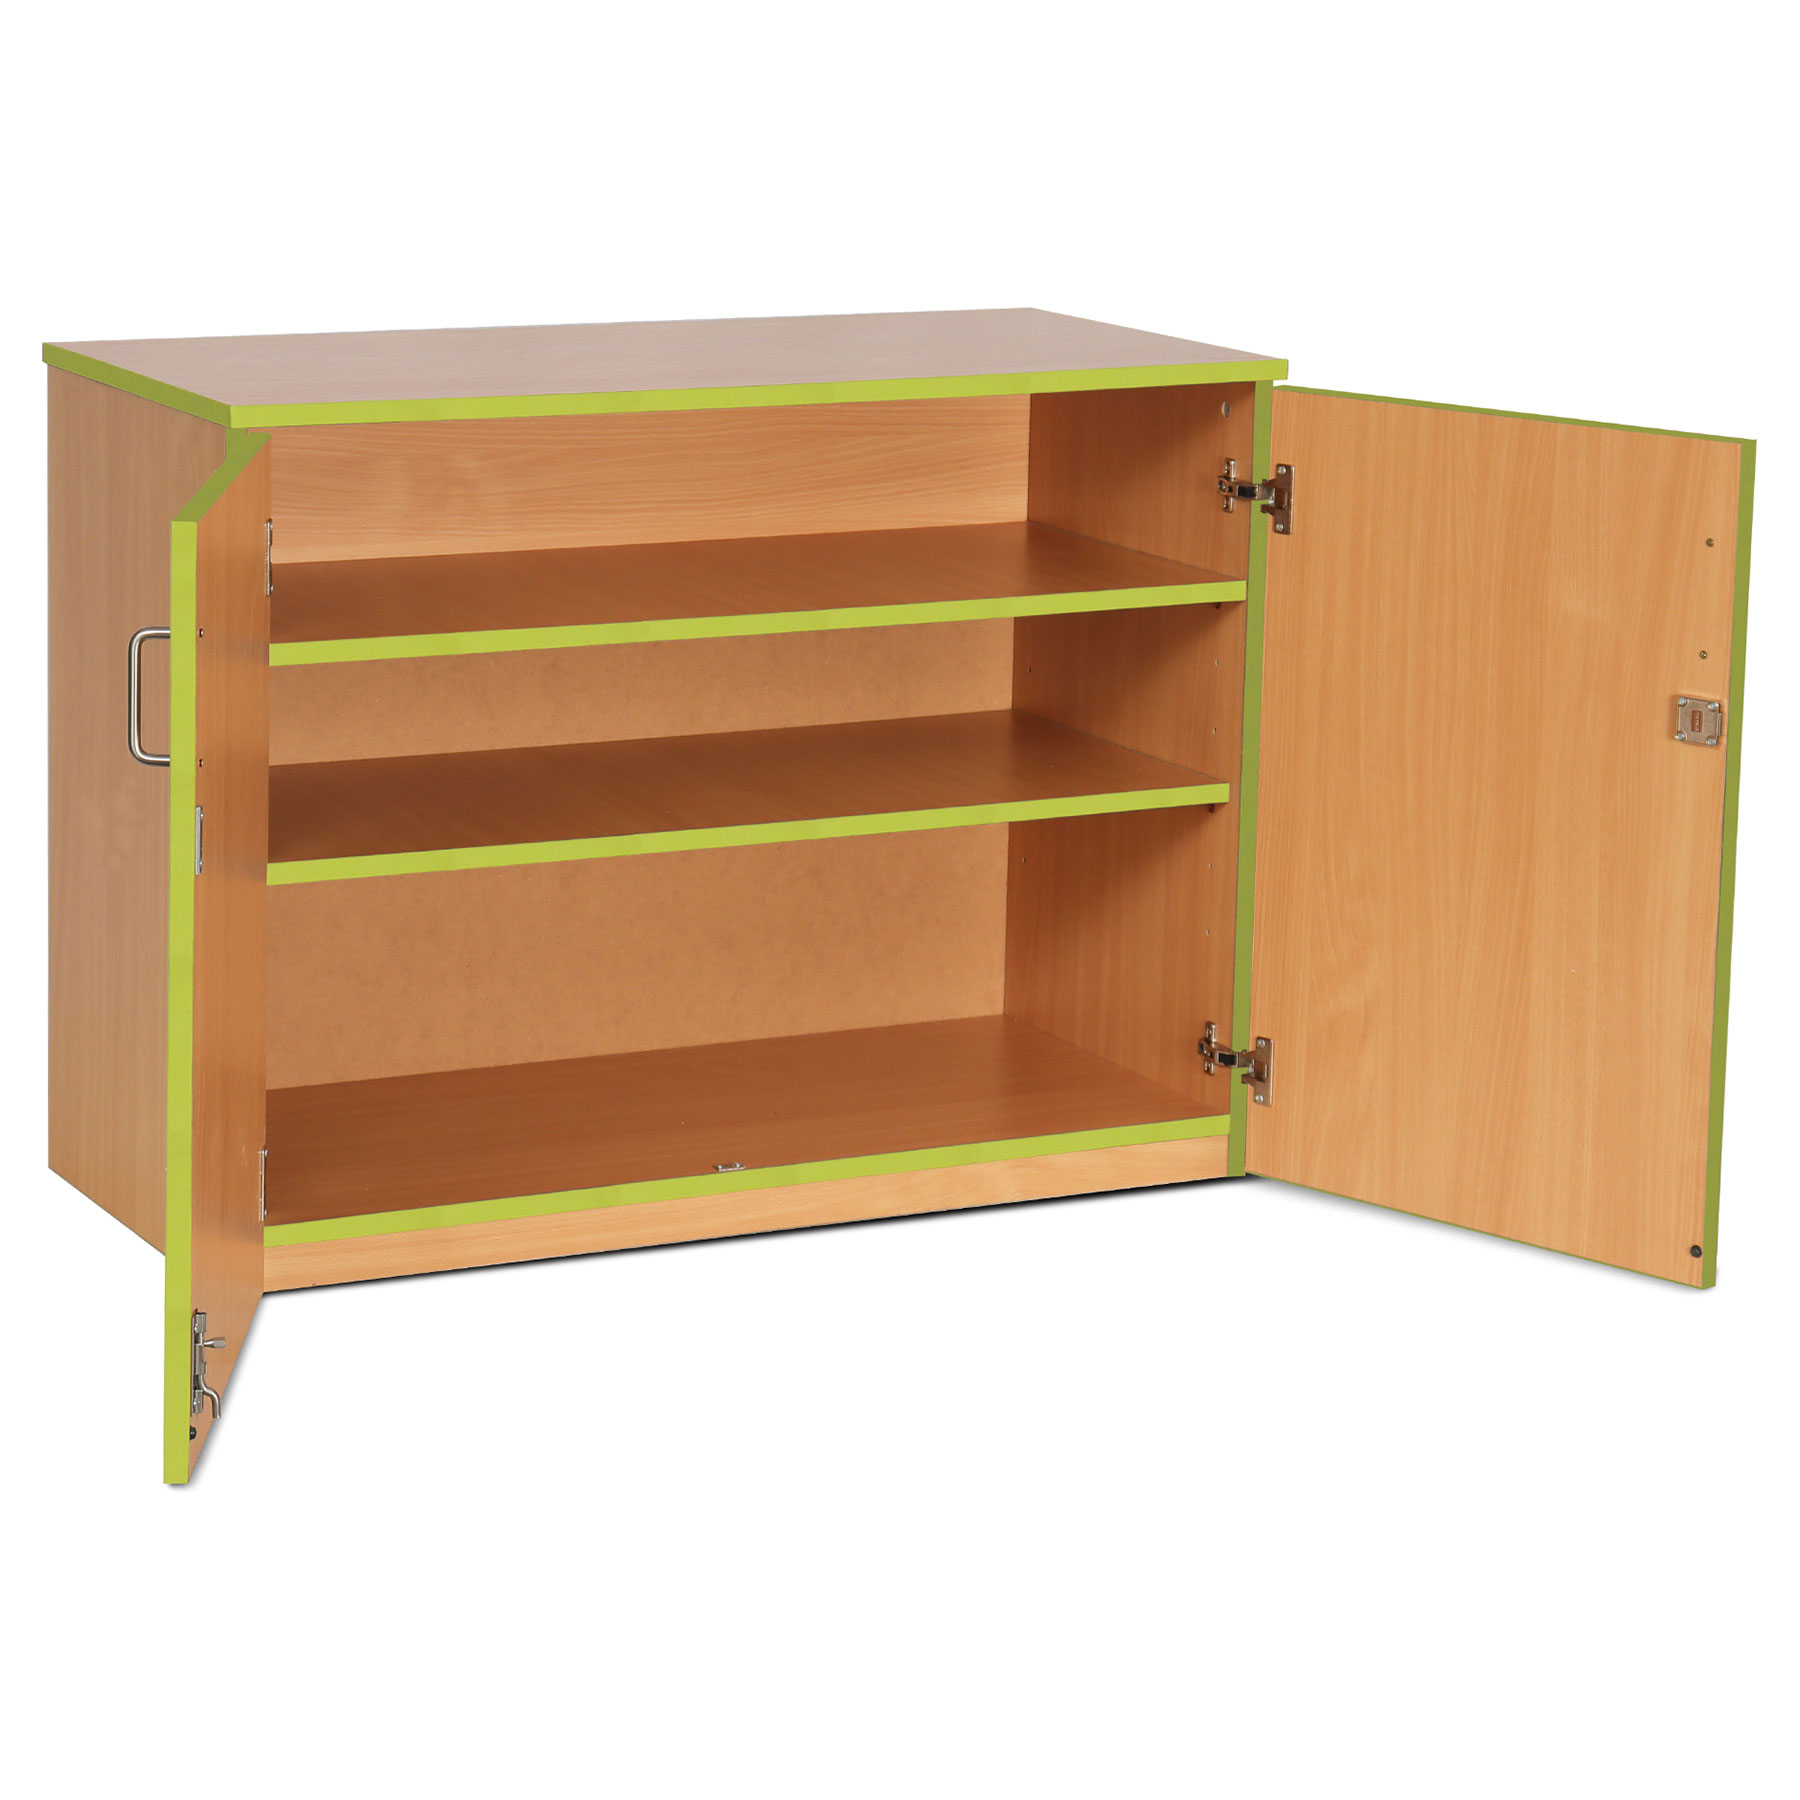 Lockable Cupboard with 2 Shelves & Lime Edging(750H)